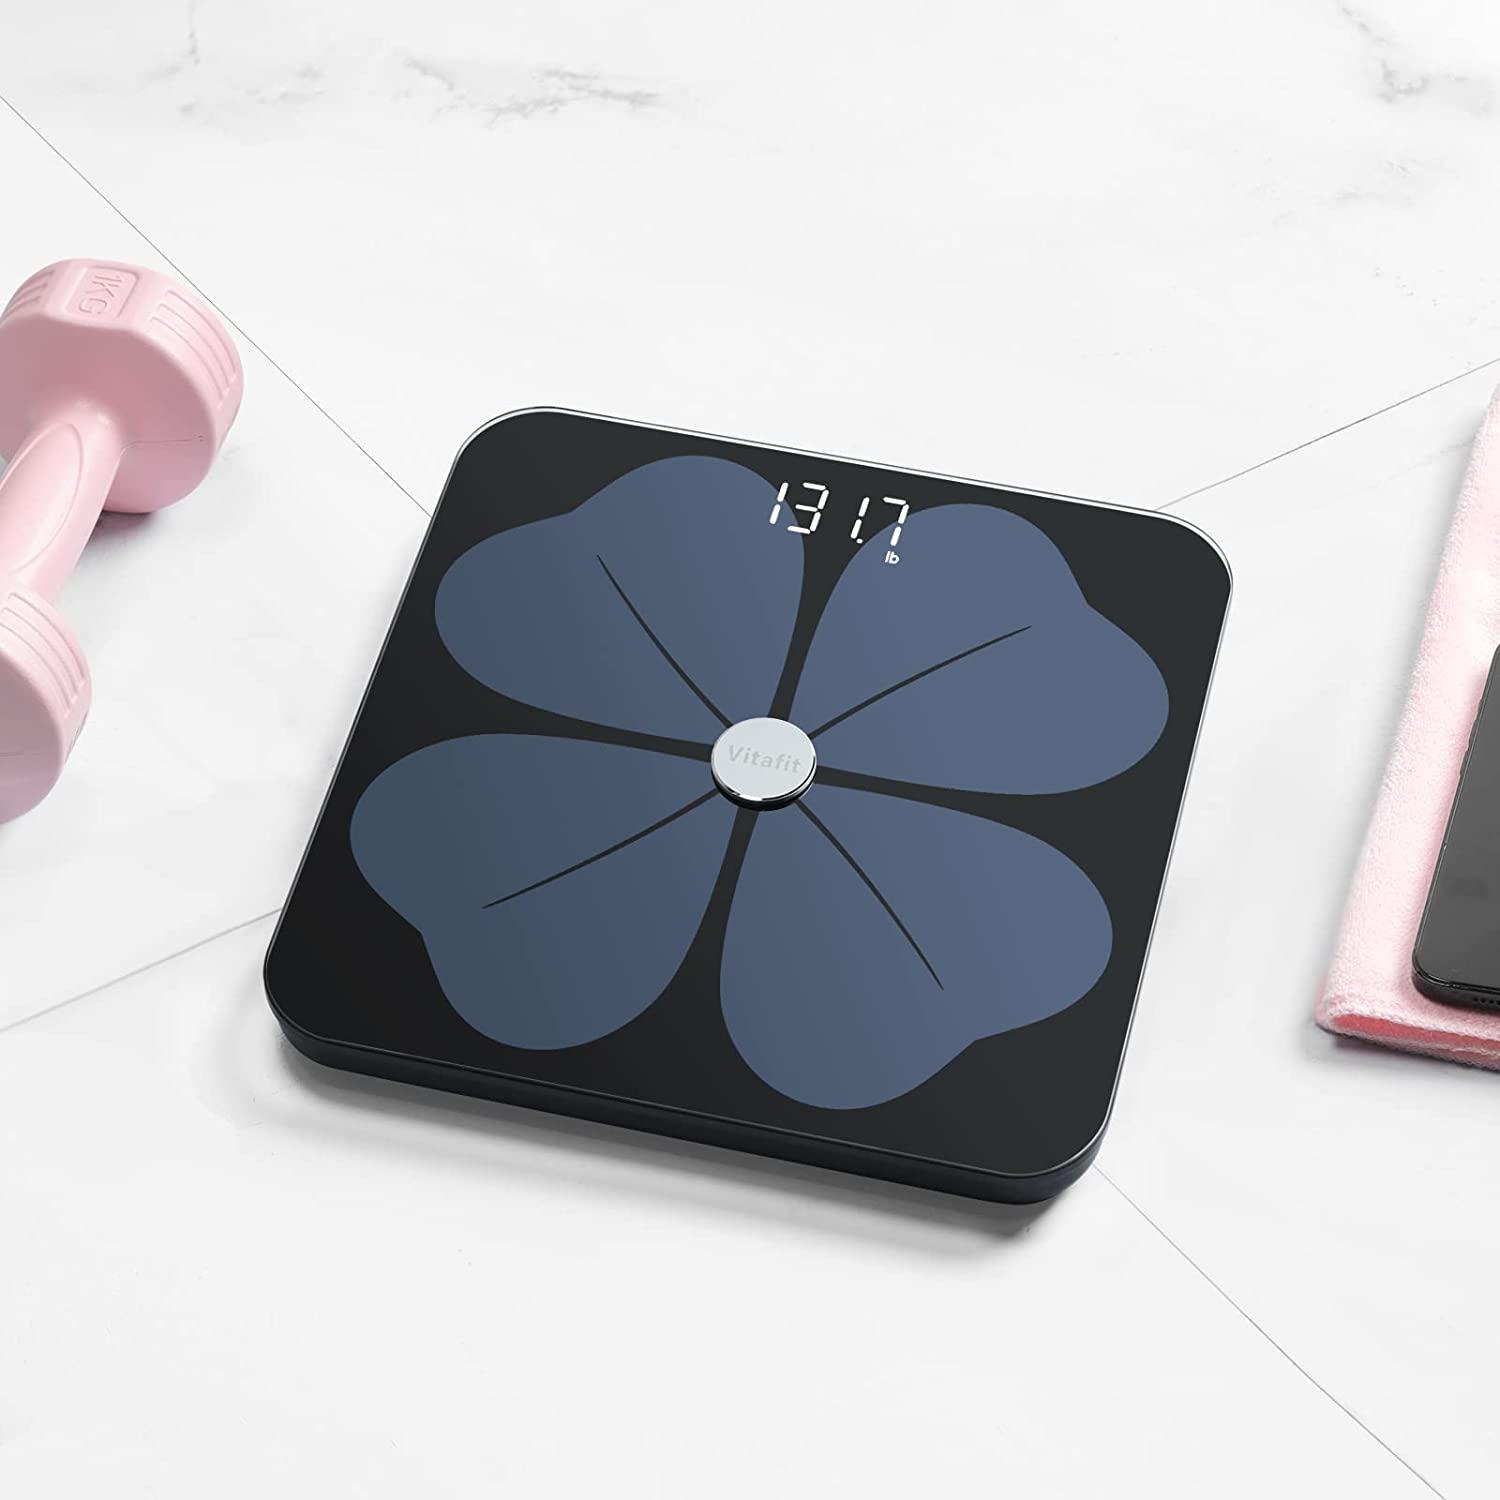 Vitafit Smart Scales for Body Weight and Fat Percentage, Weighing  Professional Since 2001,Digital Wireless Bathroom Scale for BMI Water  Muscle Sync